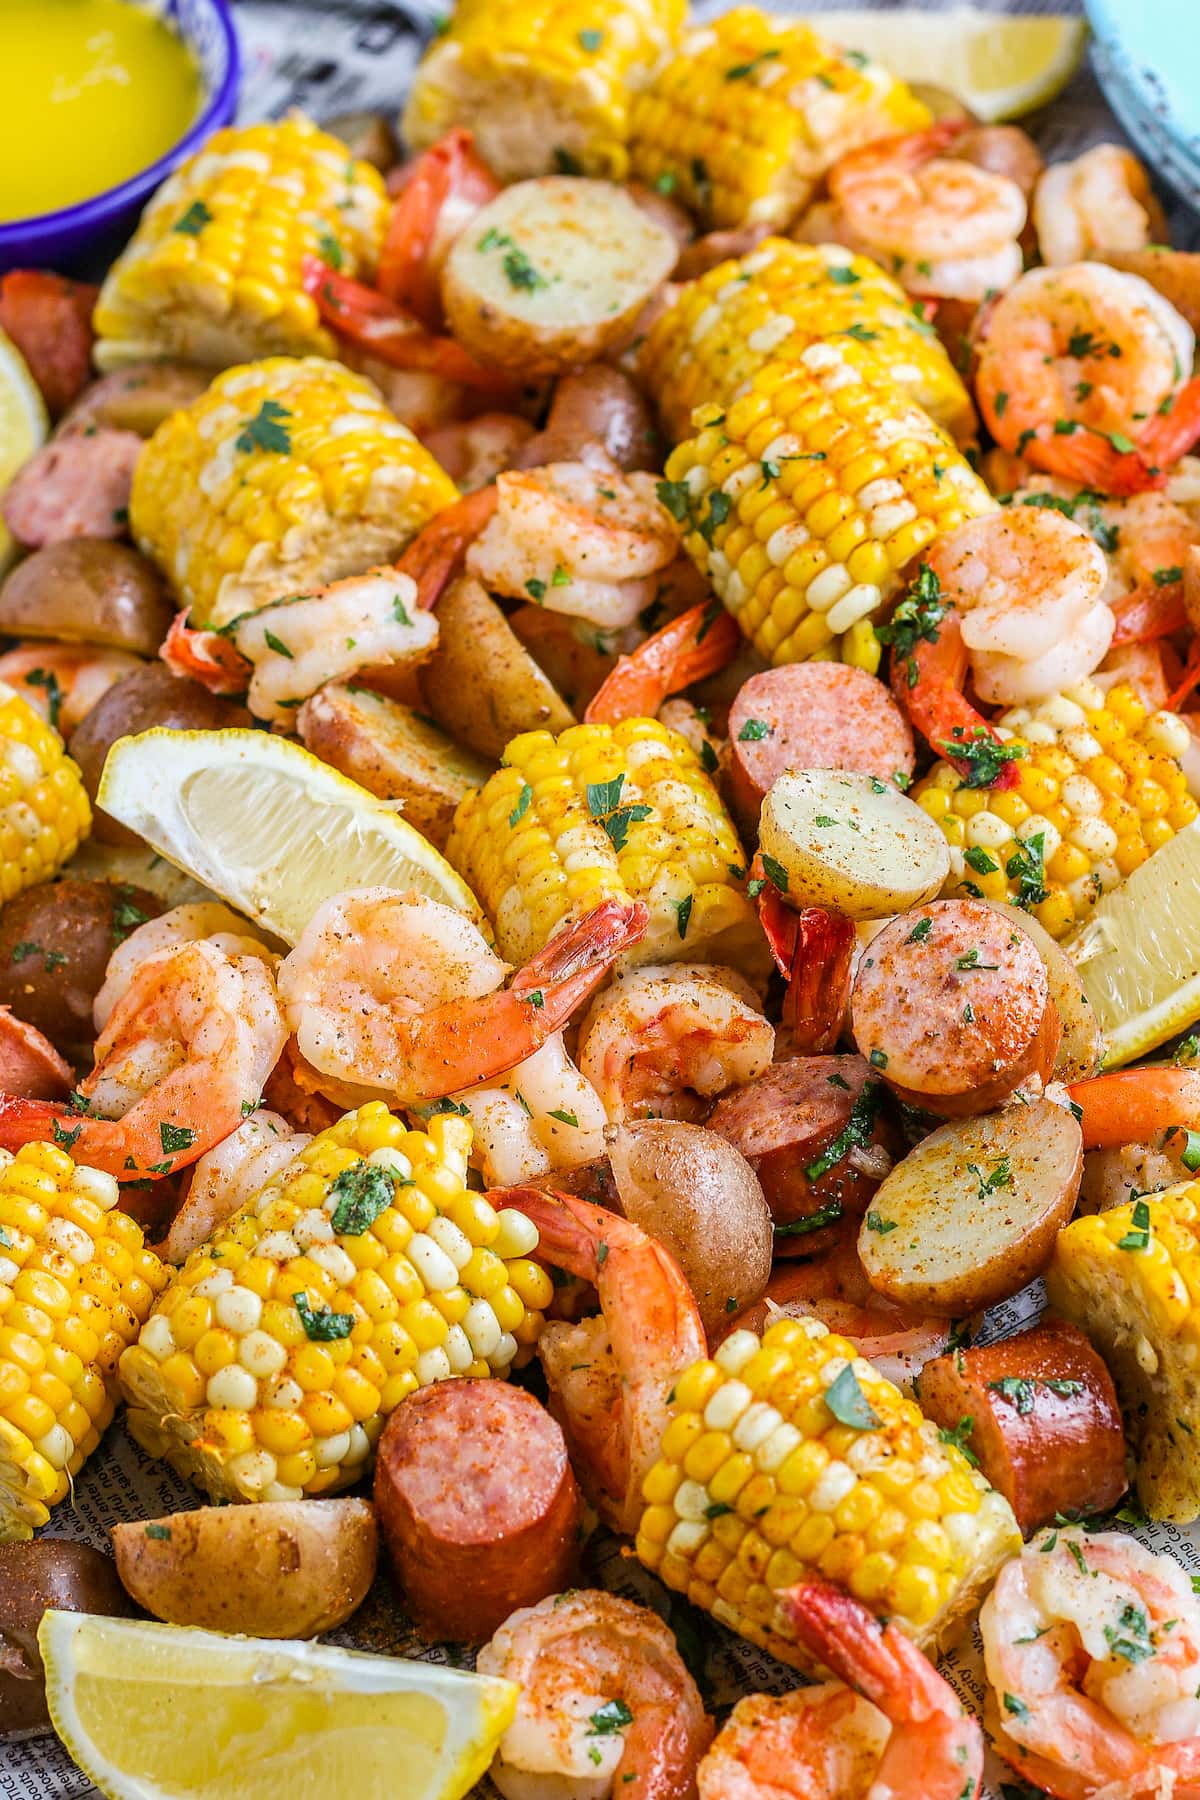 boiled shrimp with corn on the cob, sausage, and potatoes